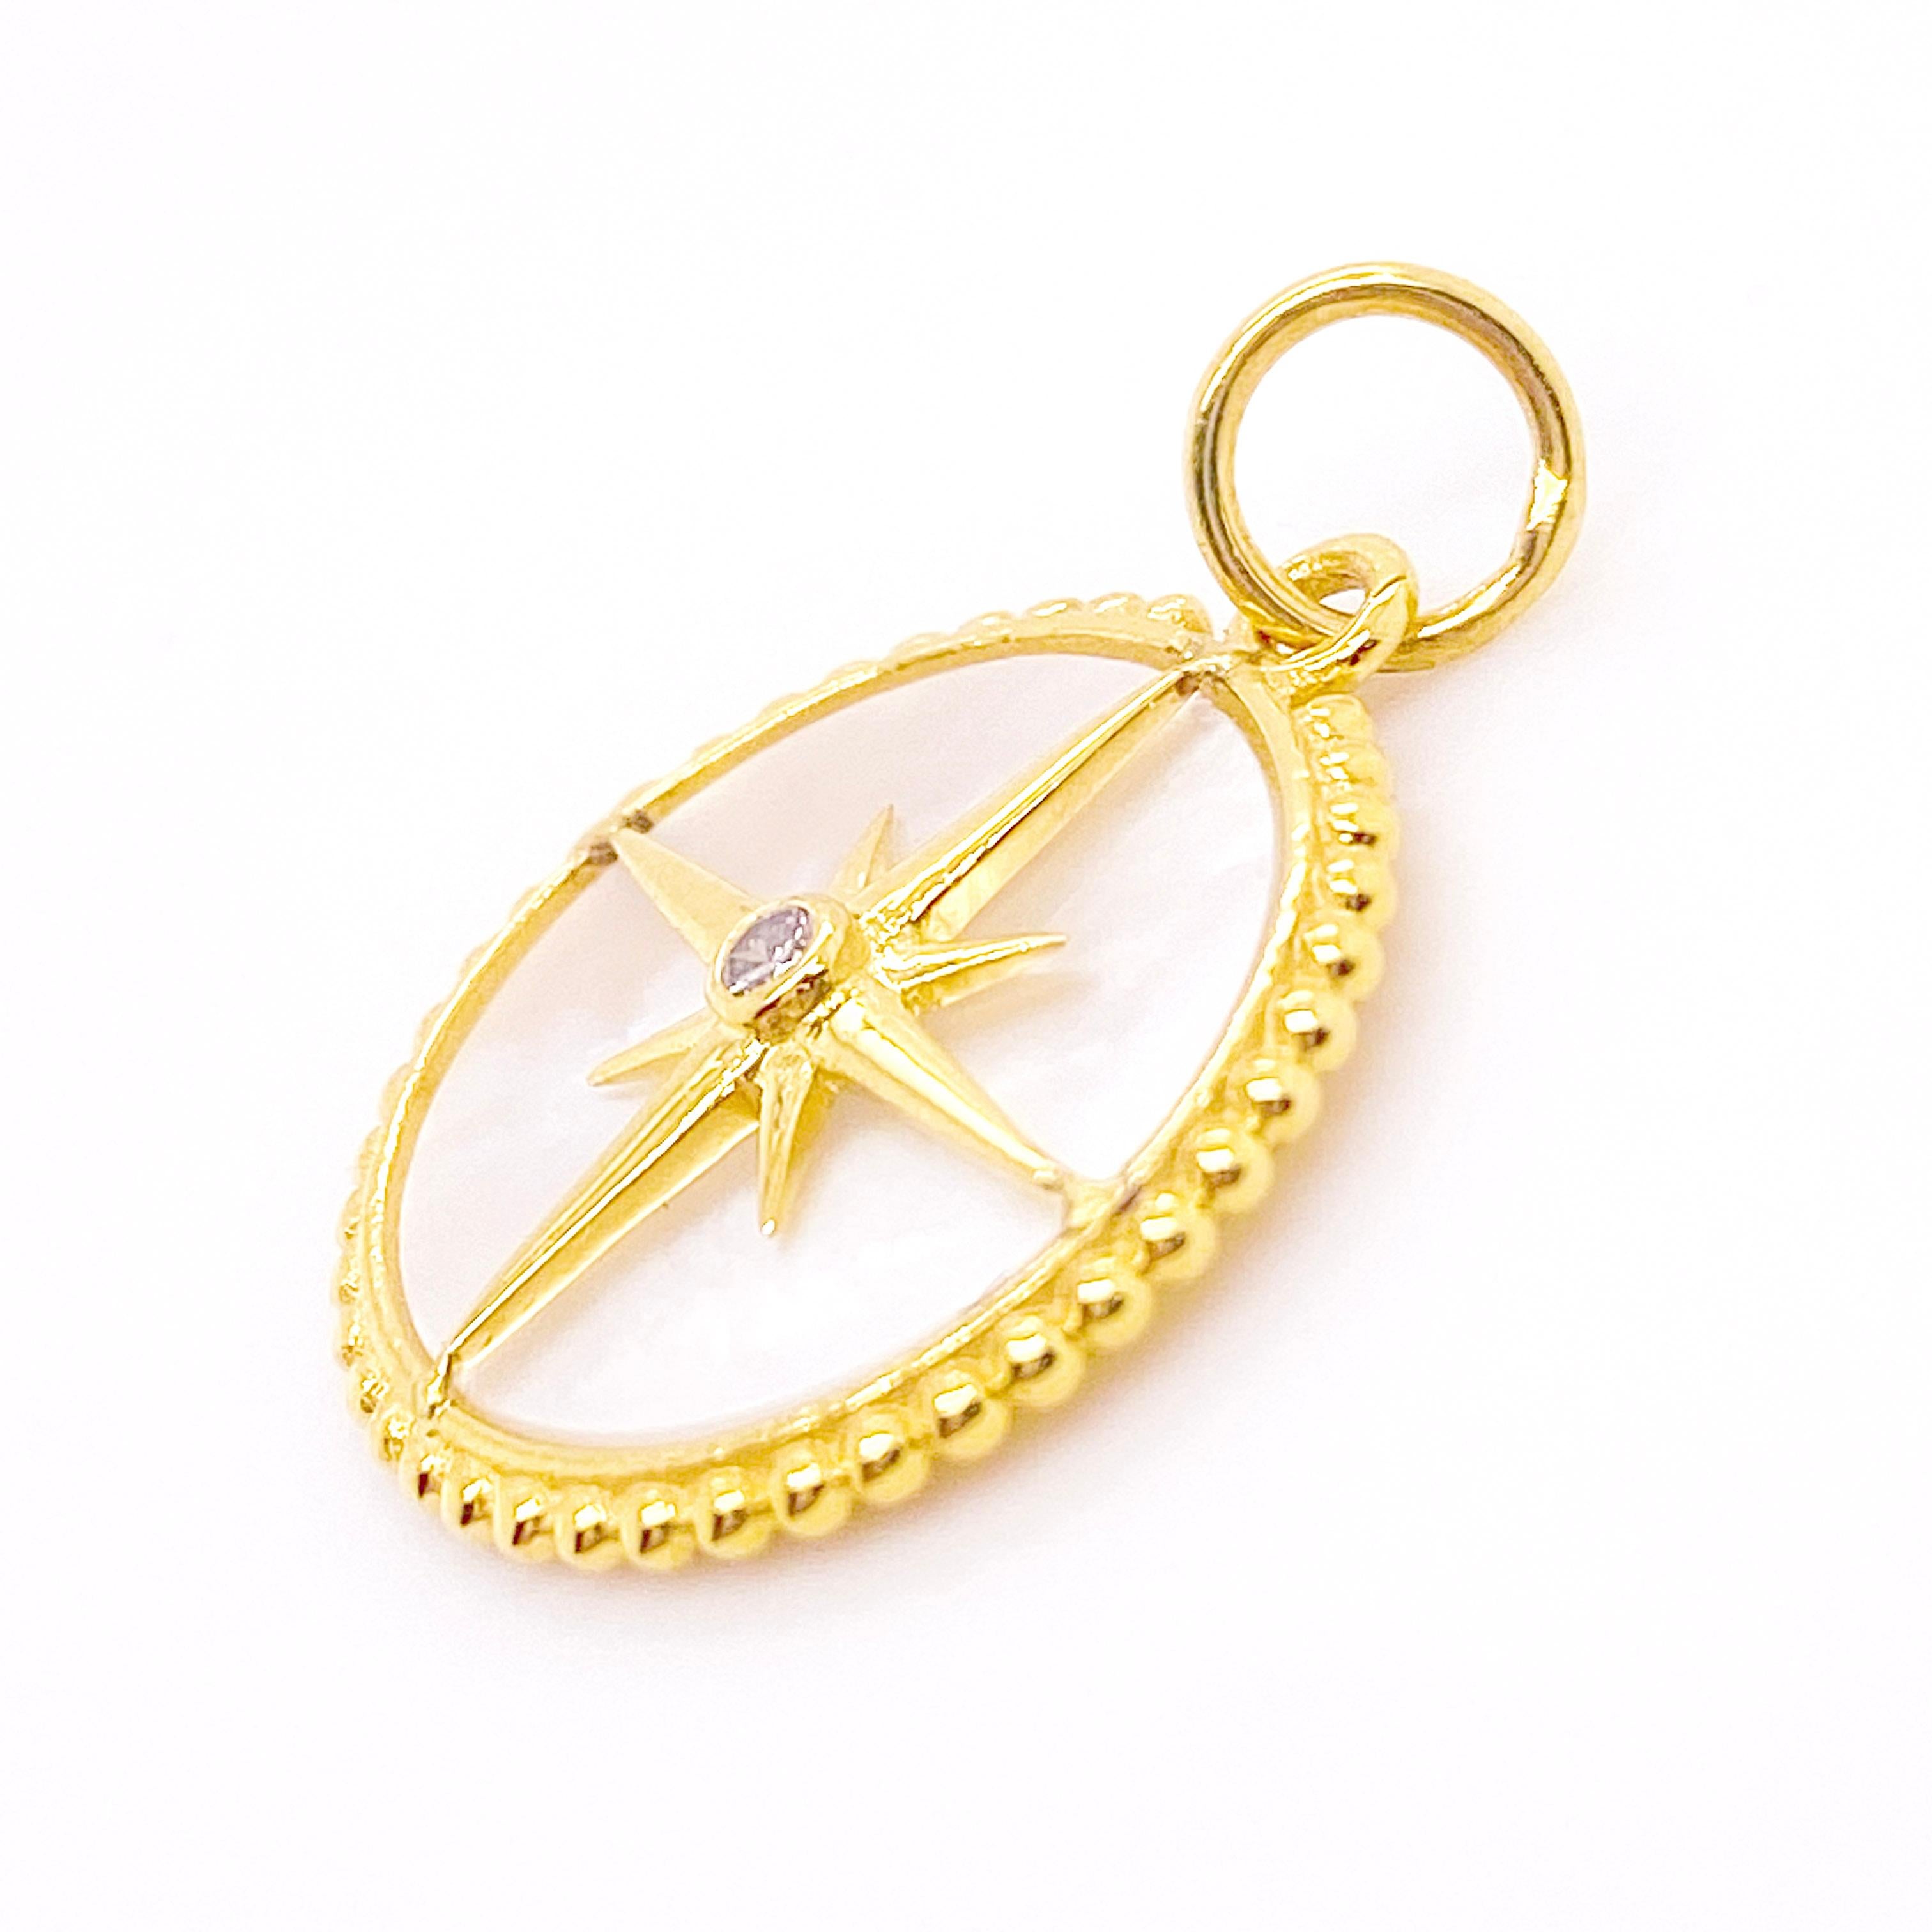 Do you guide others, or perhaps you are always looking out at the directions available to you? This compass talisman will speak your truth in a fine jewelry style. Made with a solid 14 karat gold frame, a diamond is set in the center of the 14 karat